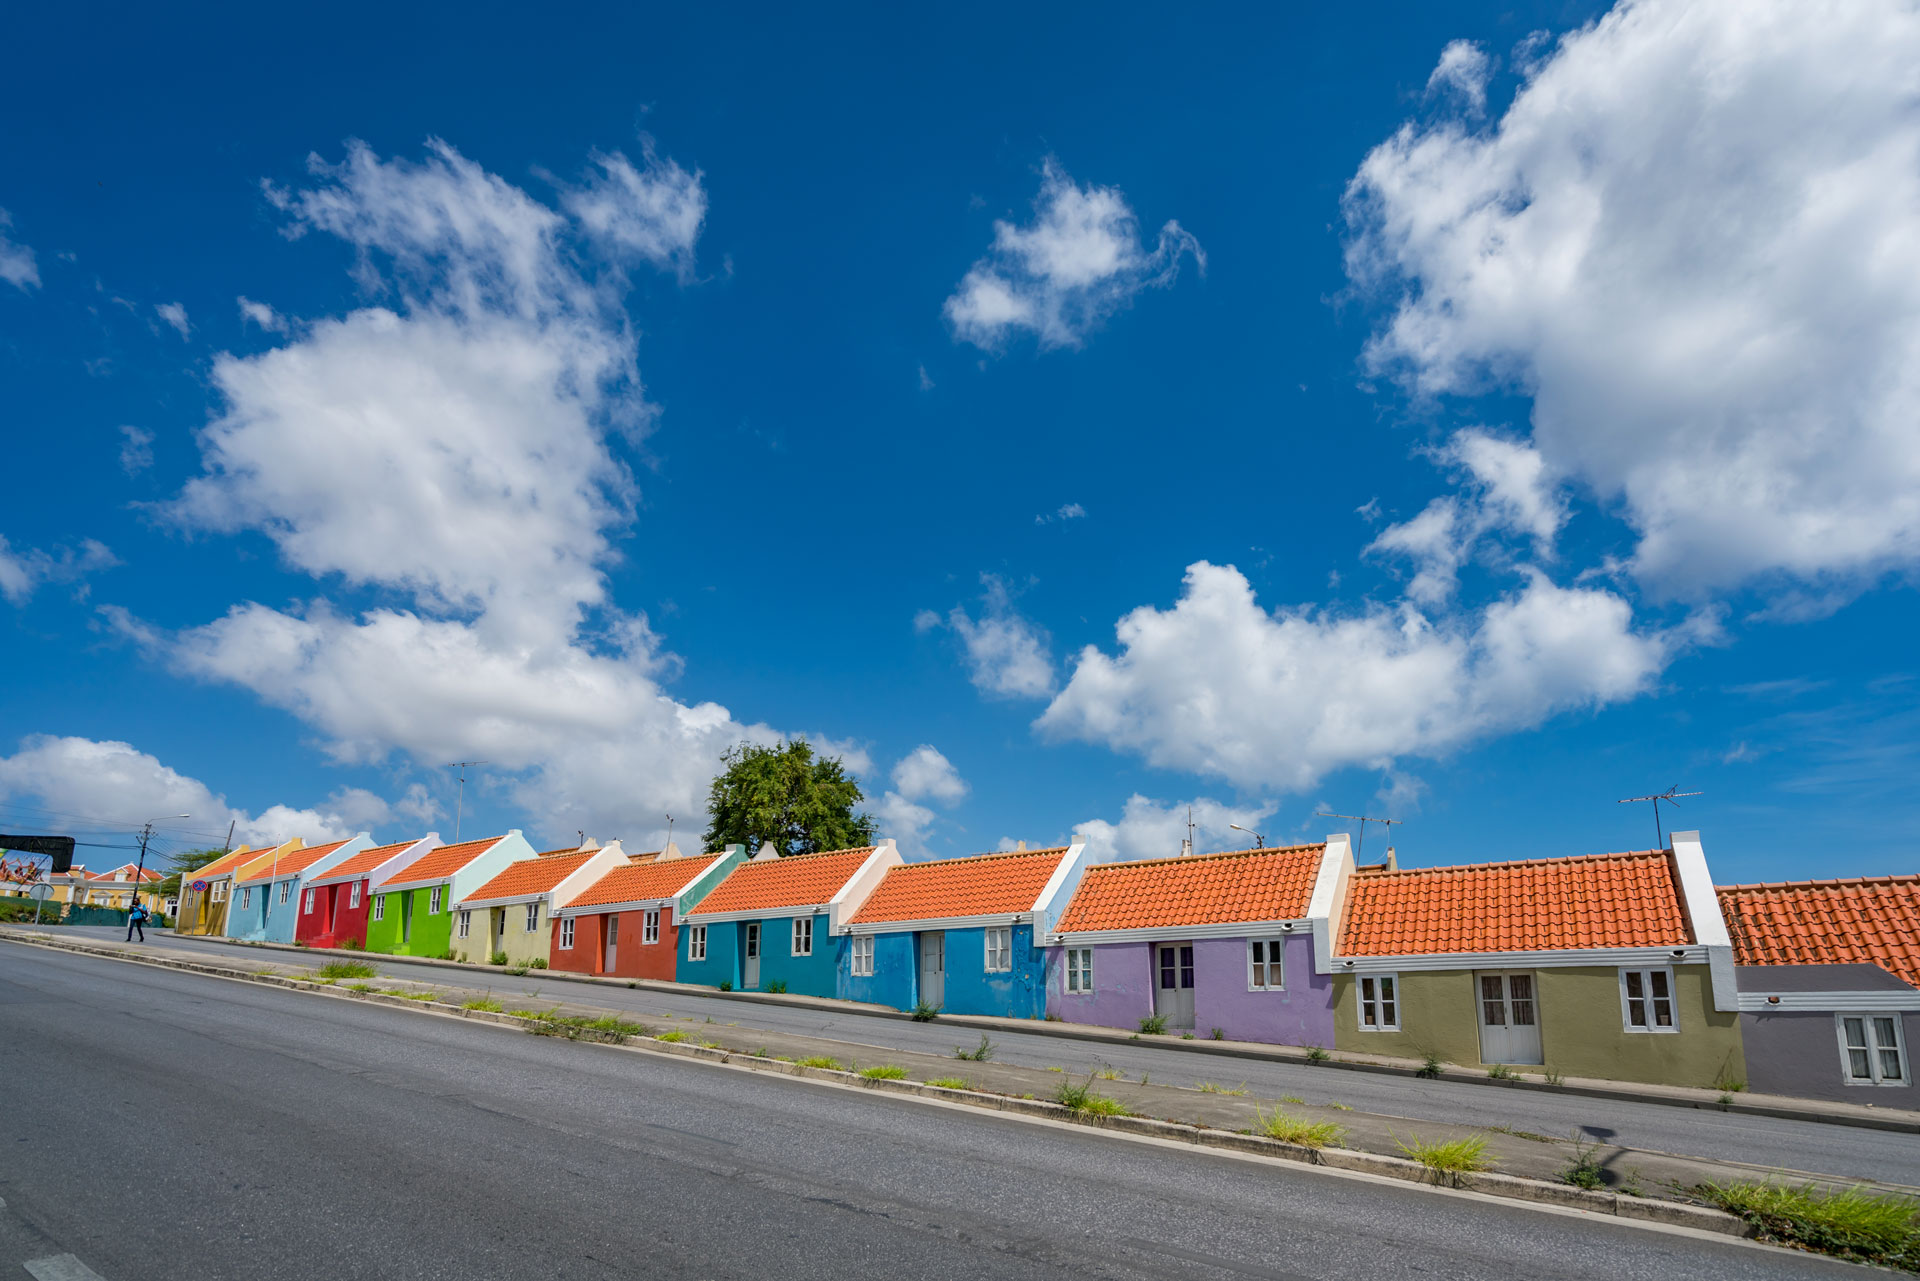 willemstad houses